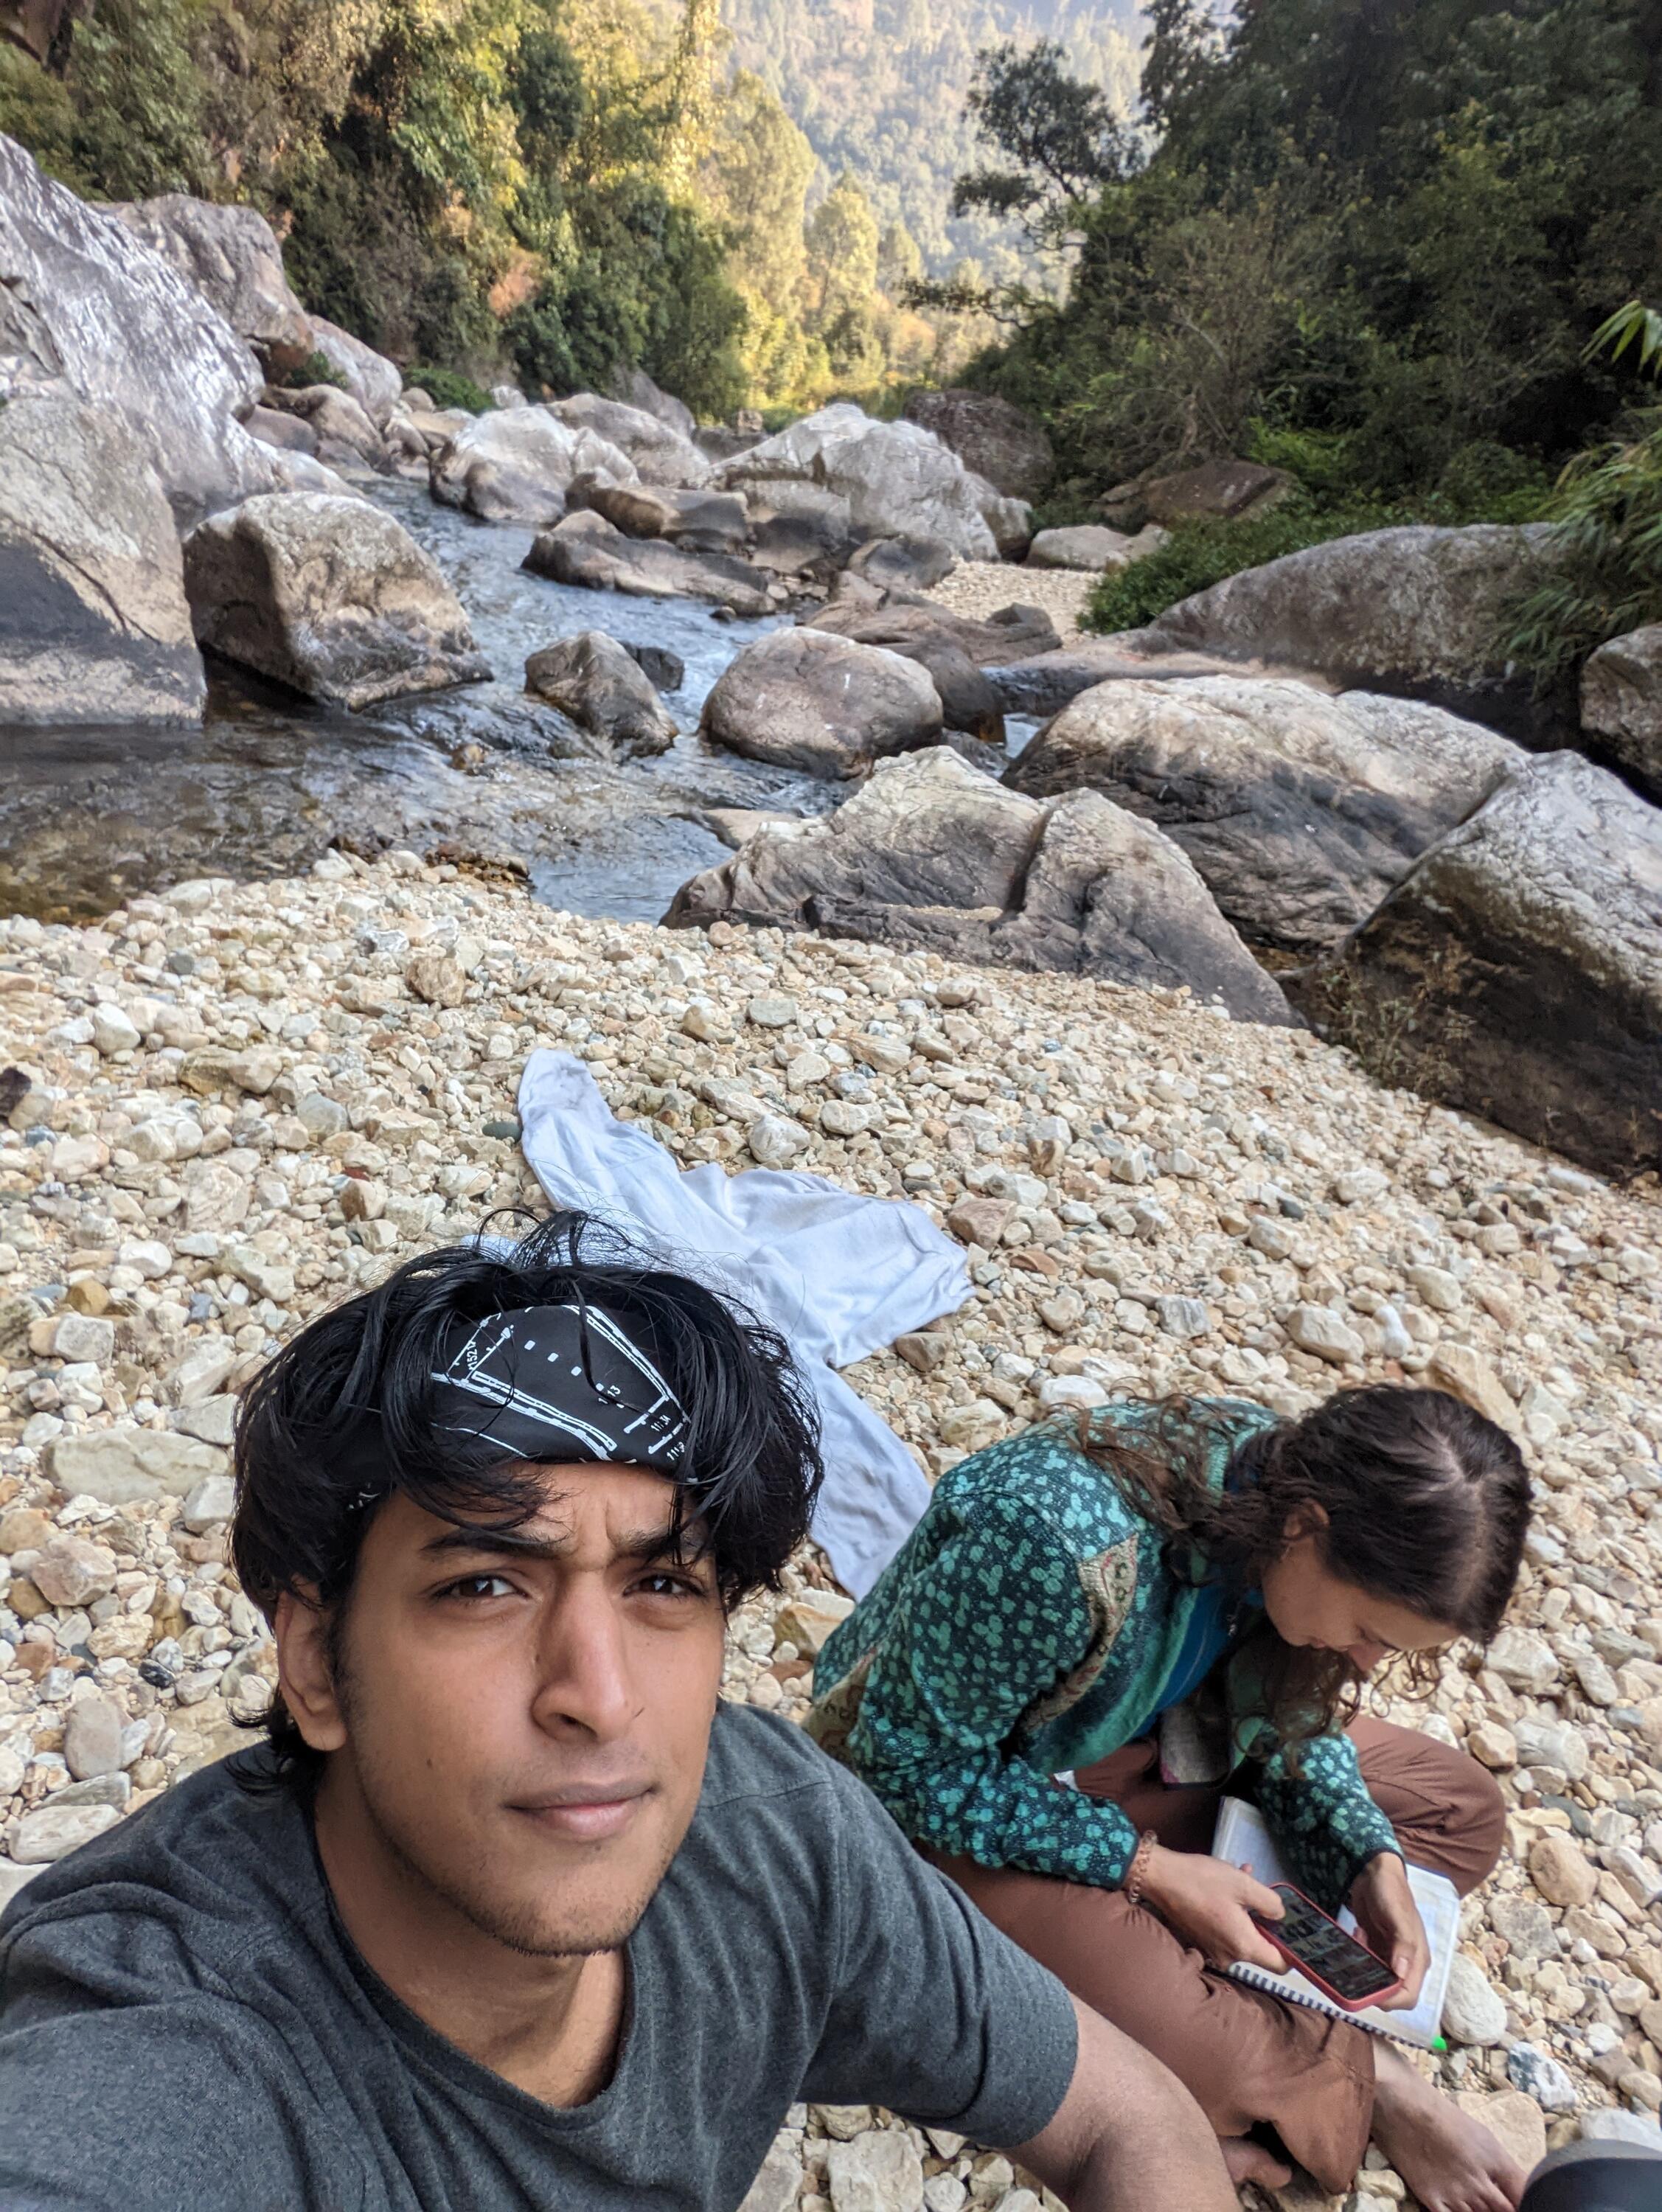 Aryaman and a friend sitting by the river.